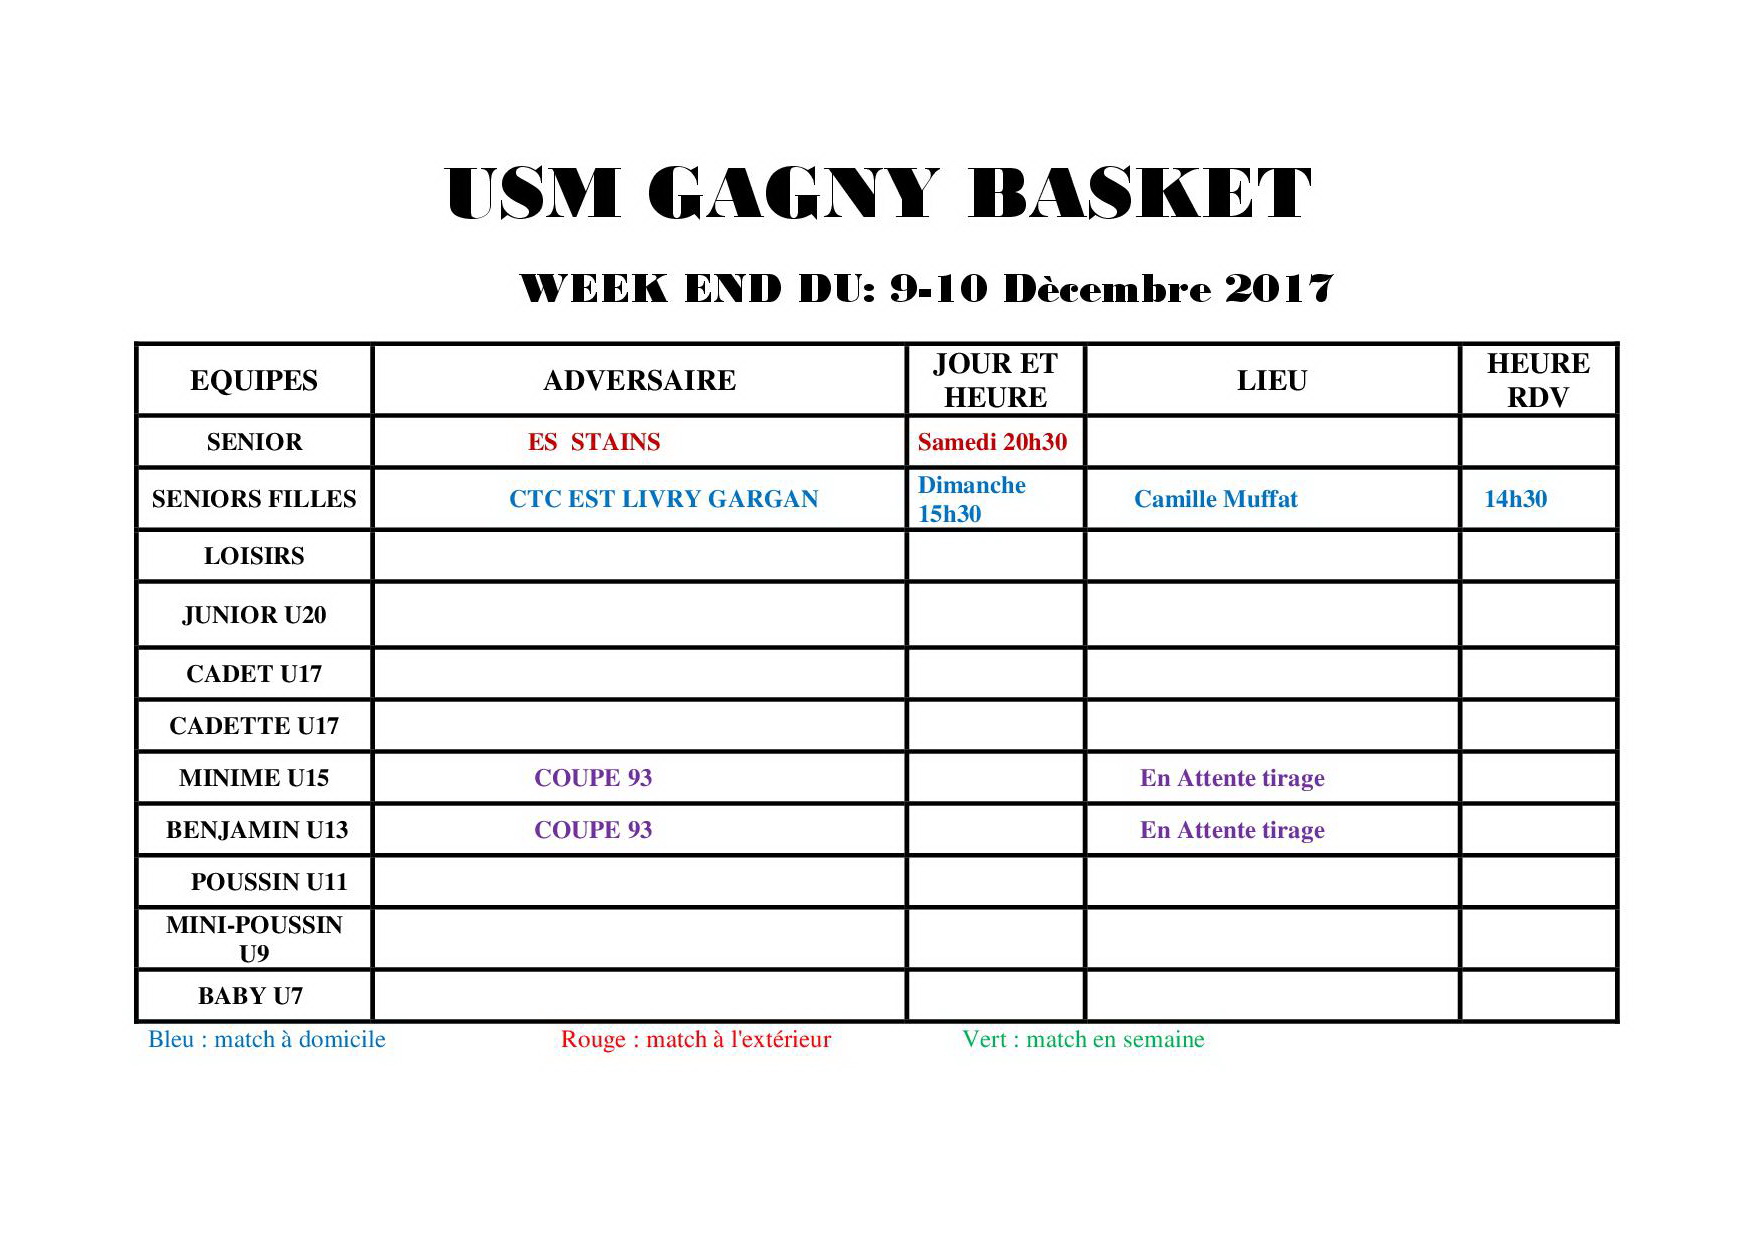 Usmg gagny planning week end 9 10 decembre 2017